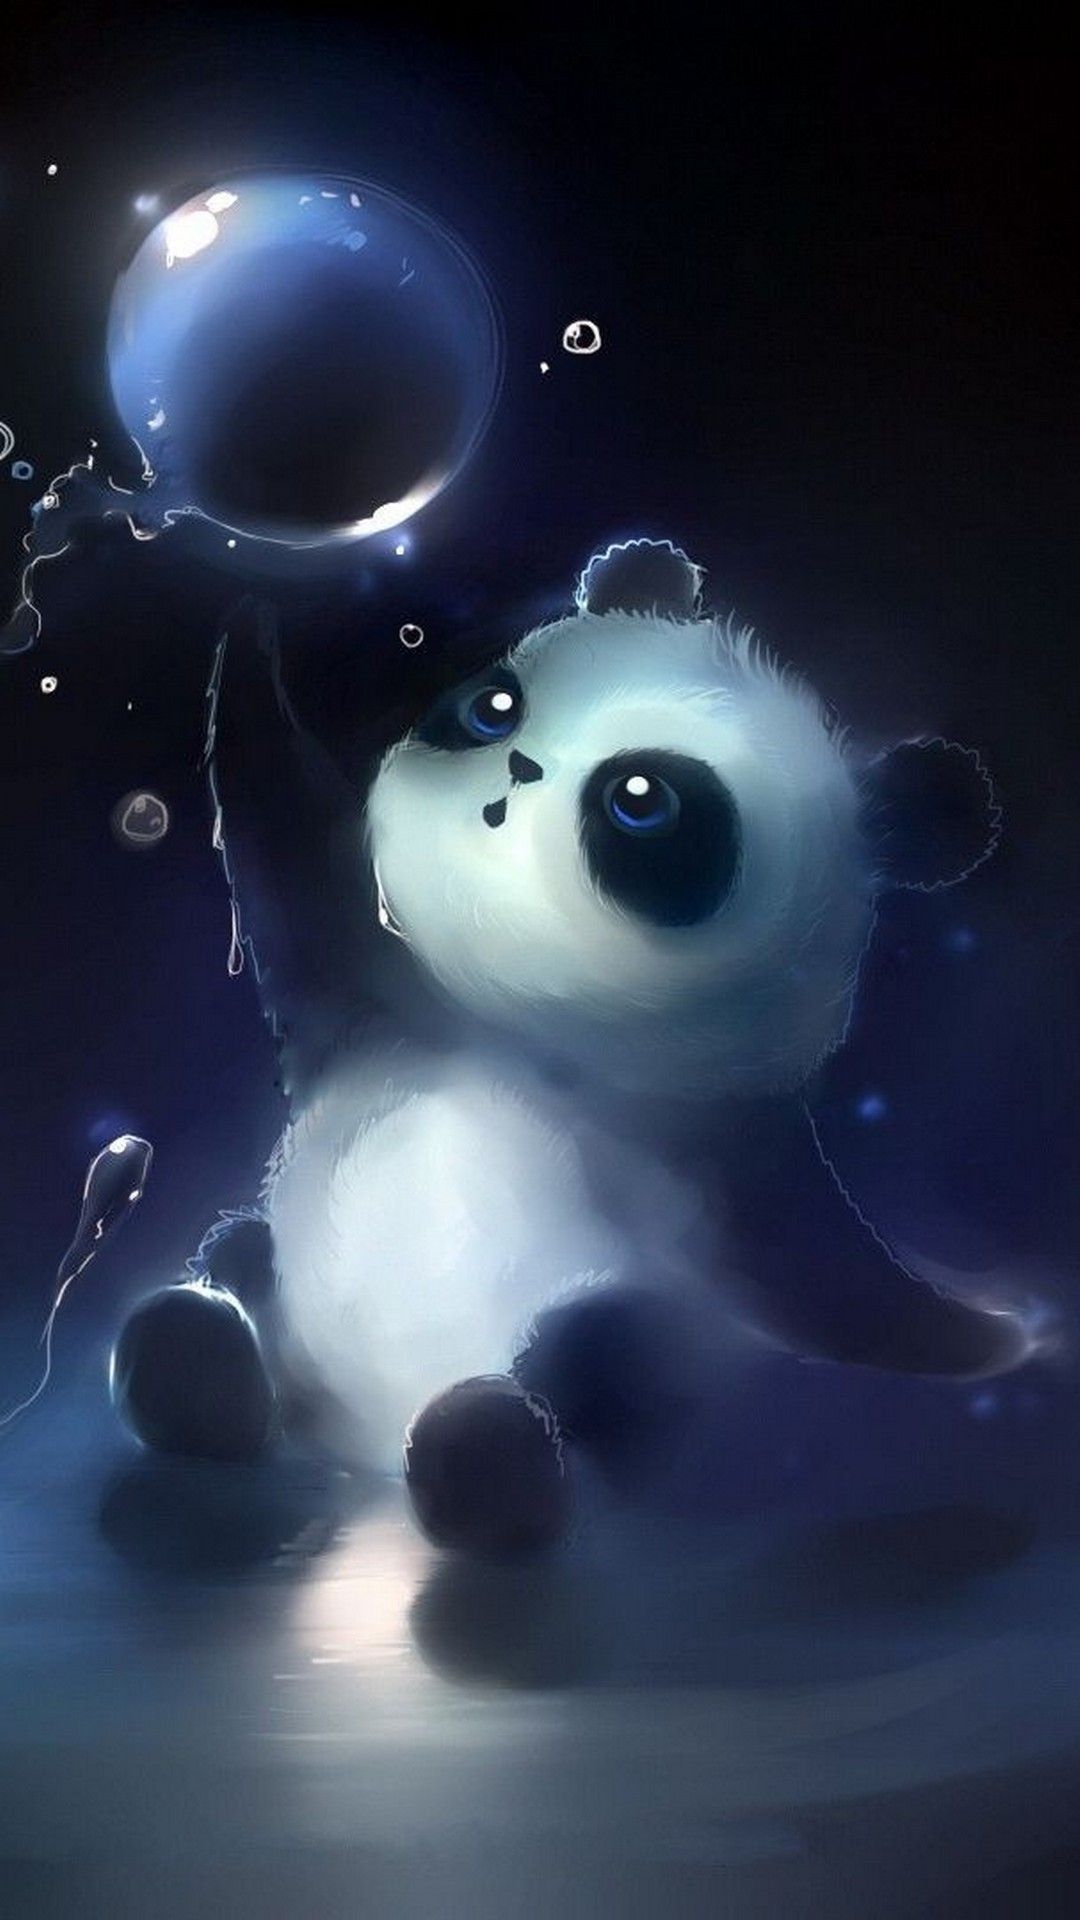 4K Panda Wallpaper HD:Amazon.com:Appstore for Android